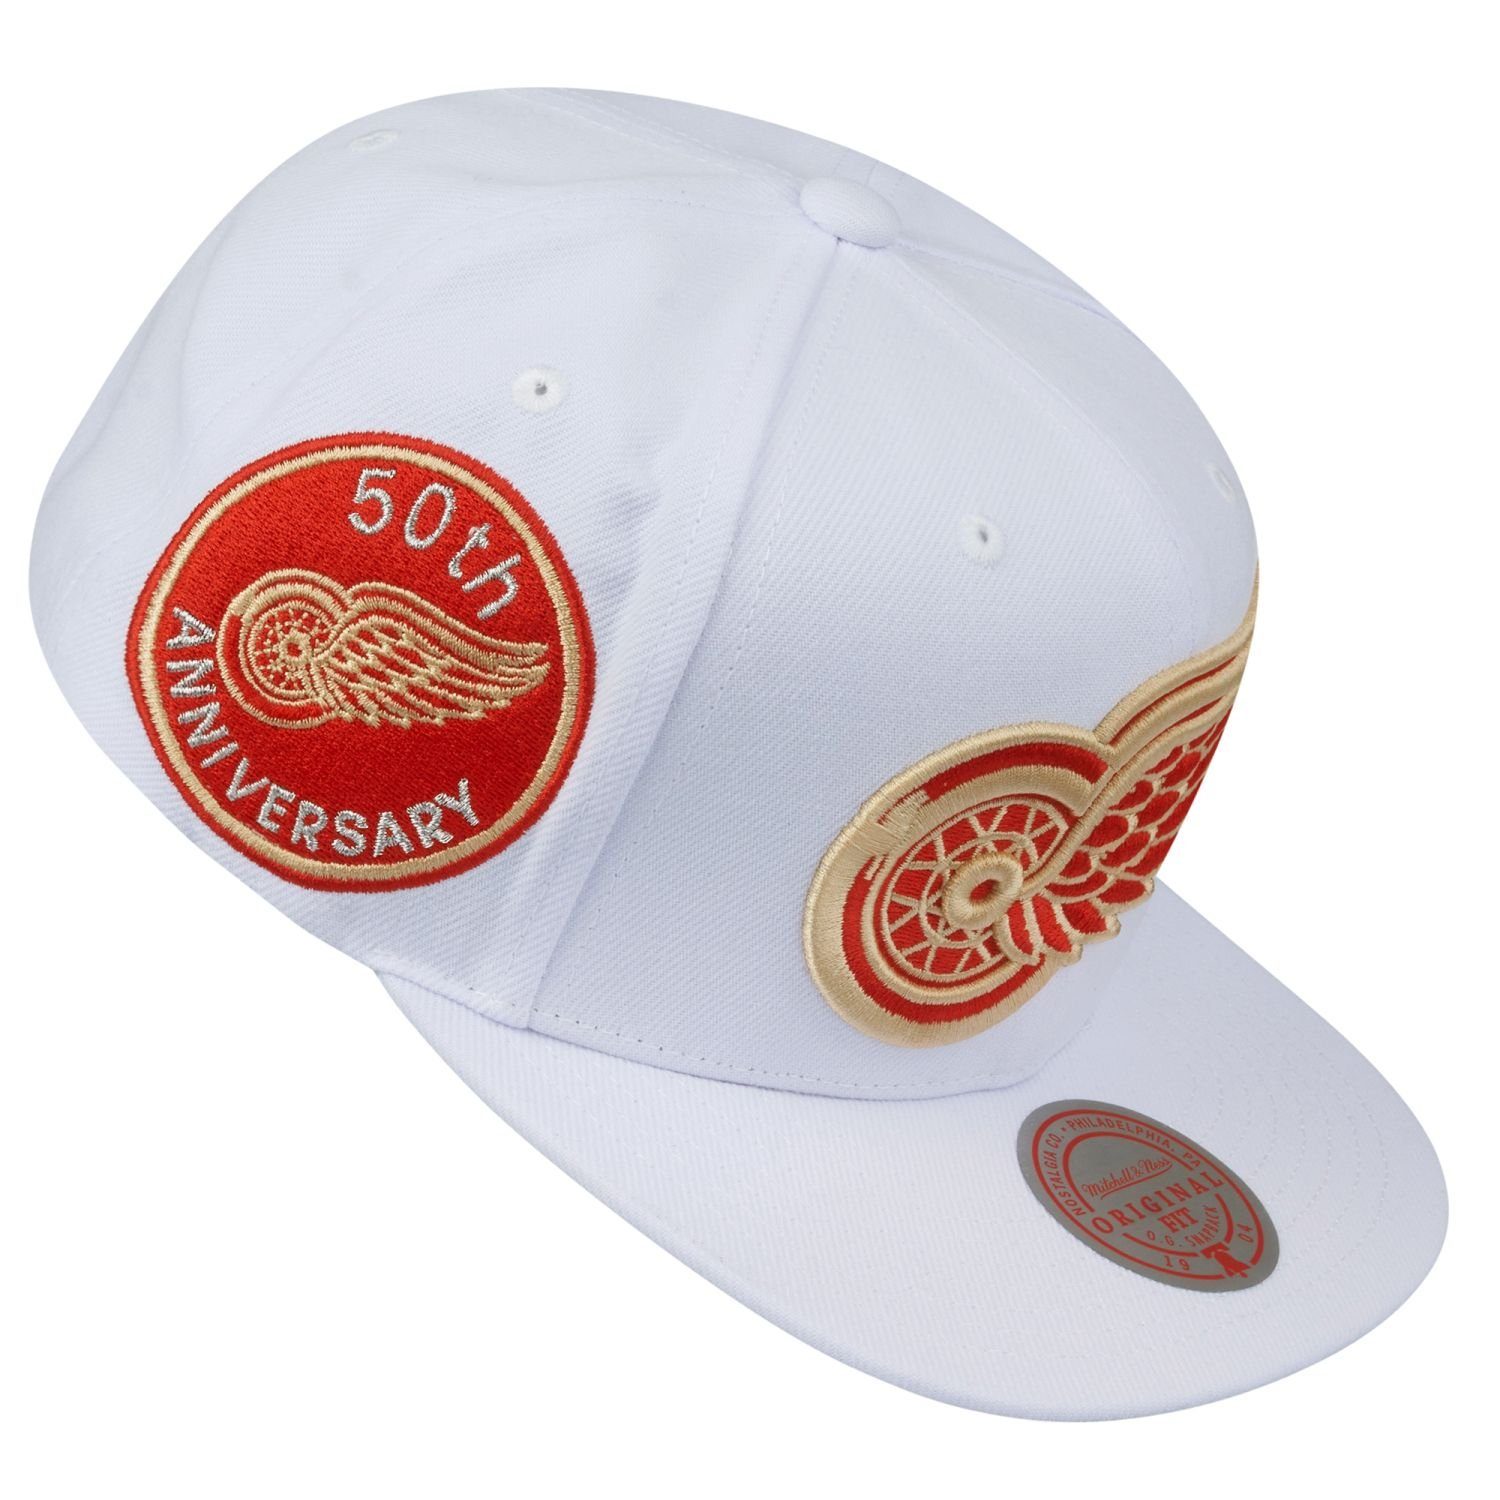 Mitchell & Ness Red Wings WHITE Detroit Snapback Cap